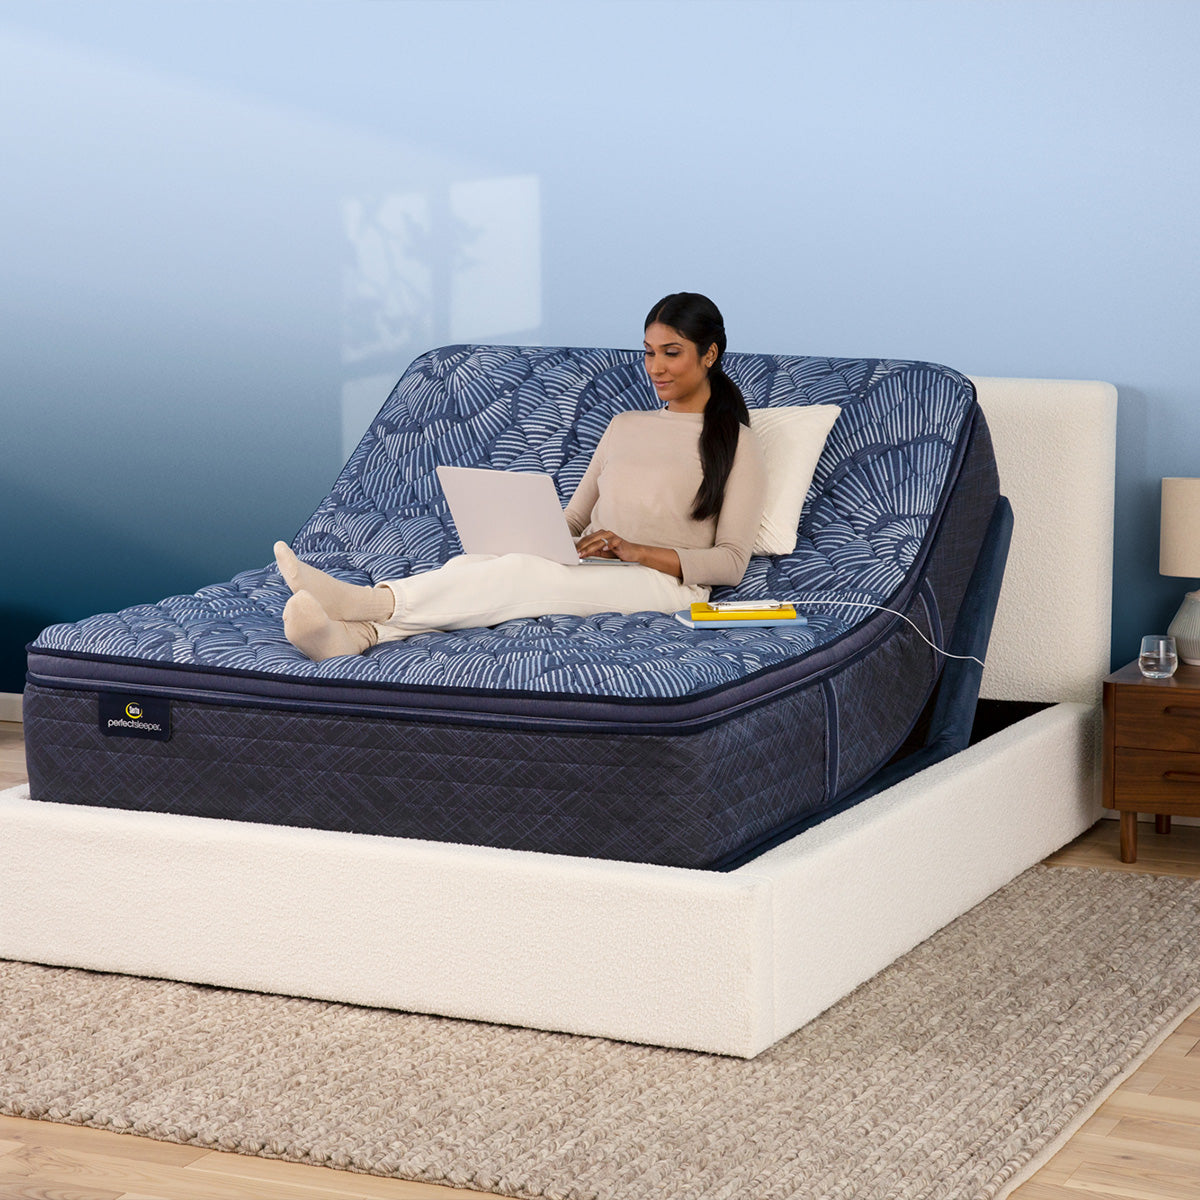 Woman using laptop on a mattress elevated by a Serta Motion Essentials Adjustable Base